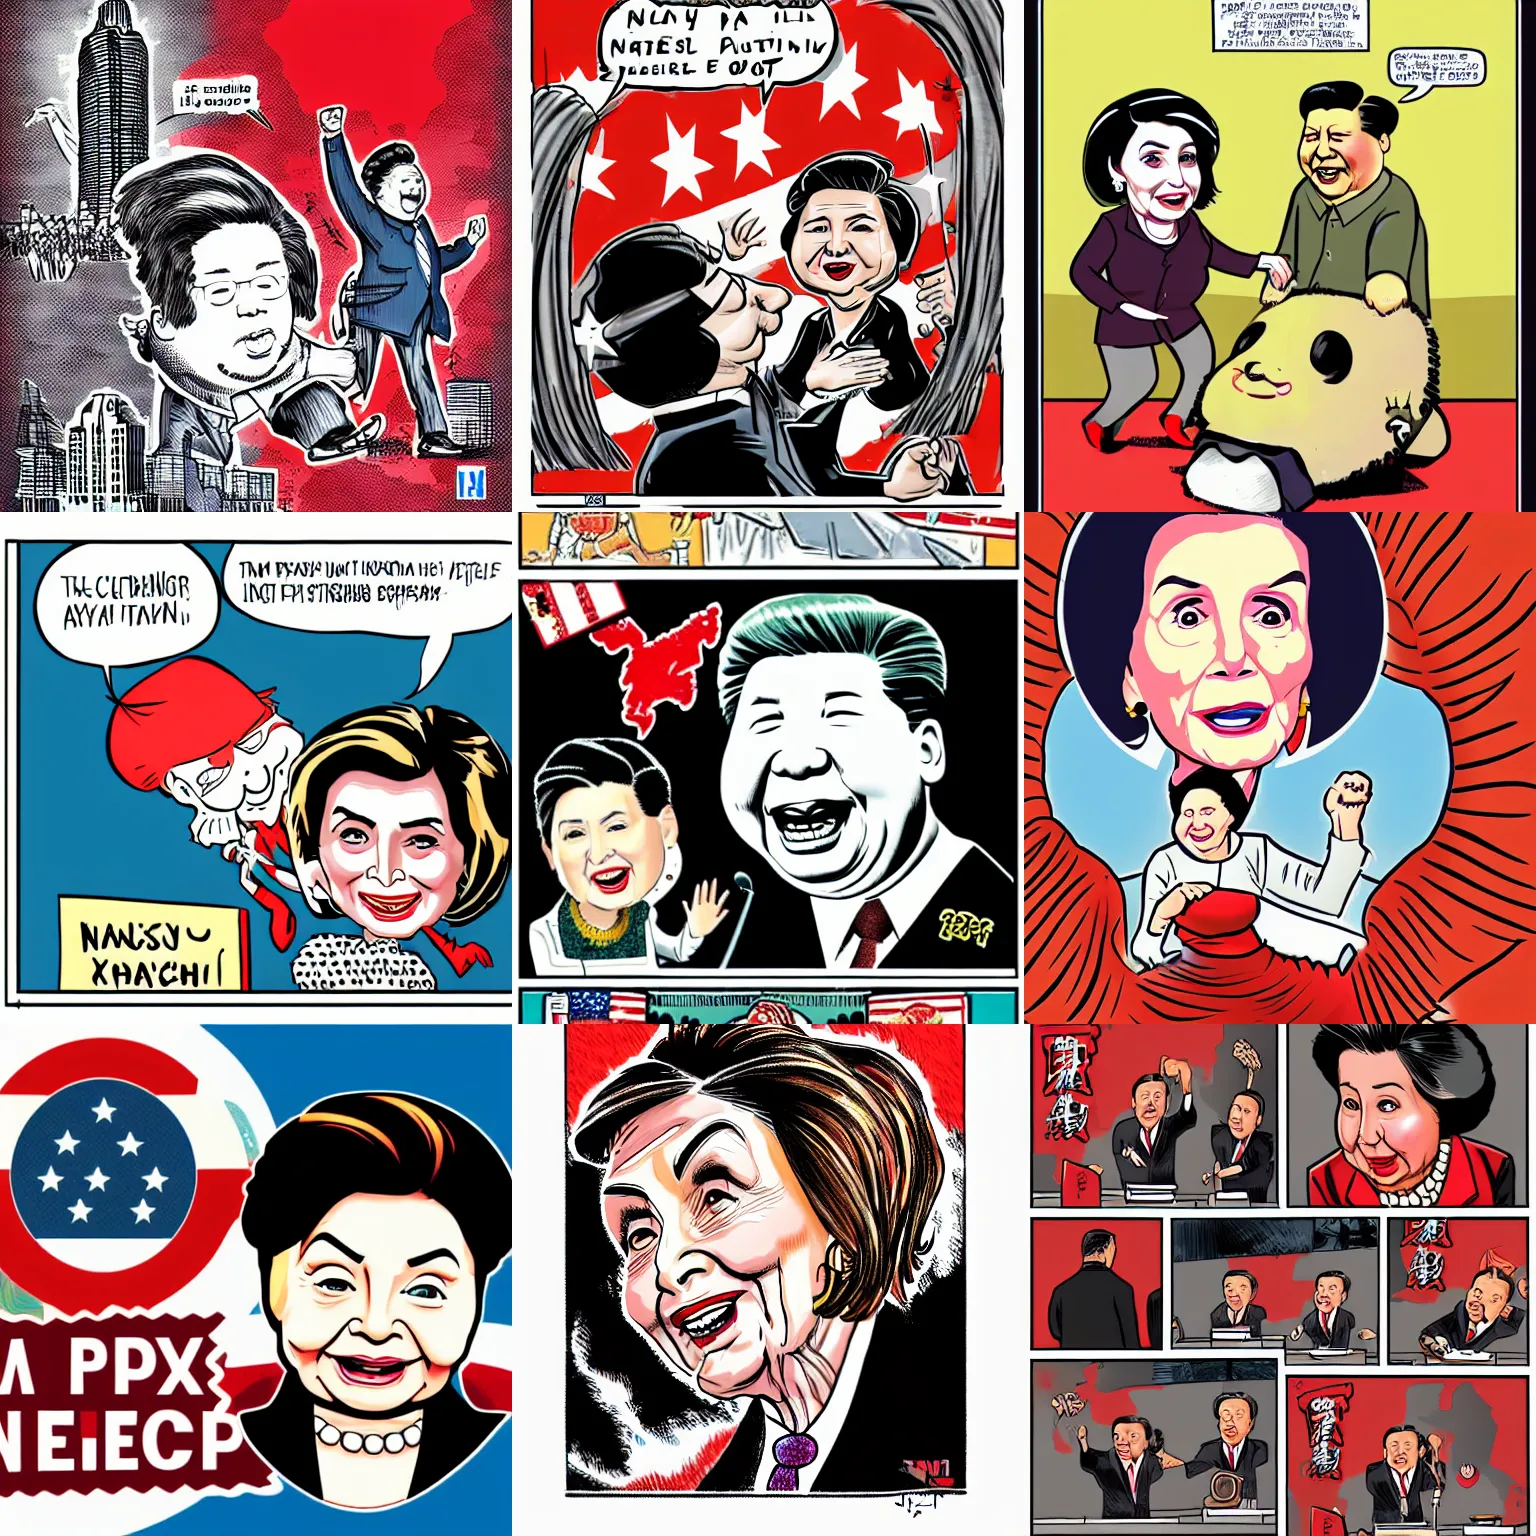 Prompt: nancy pelosi punch xi jinping, detailed illustration by tim doyle